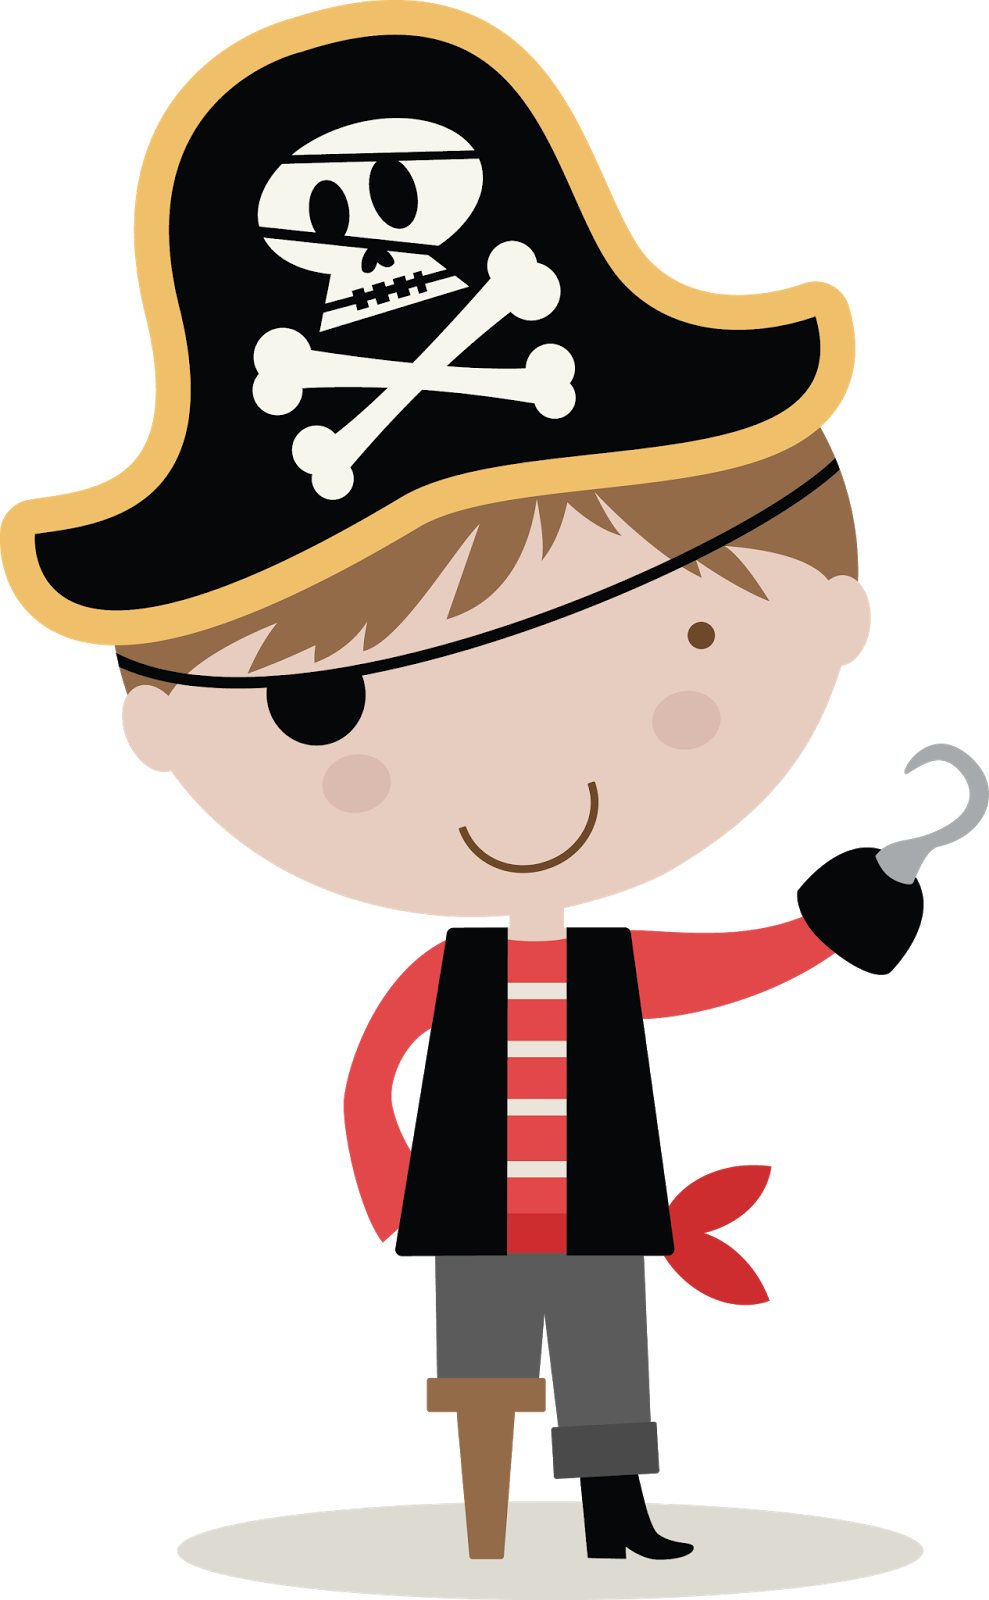 clipart pirates pictures - photo #46